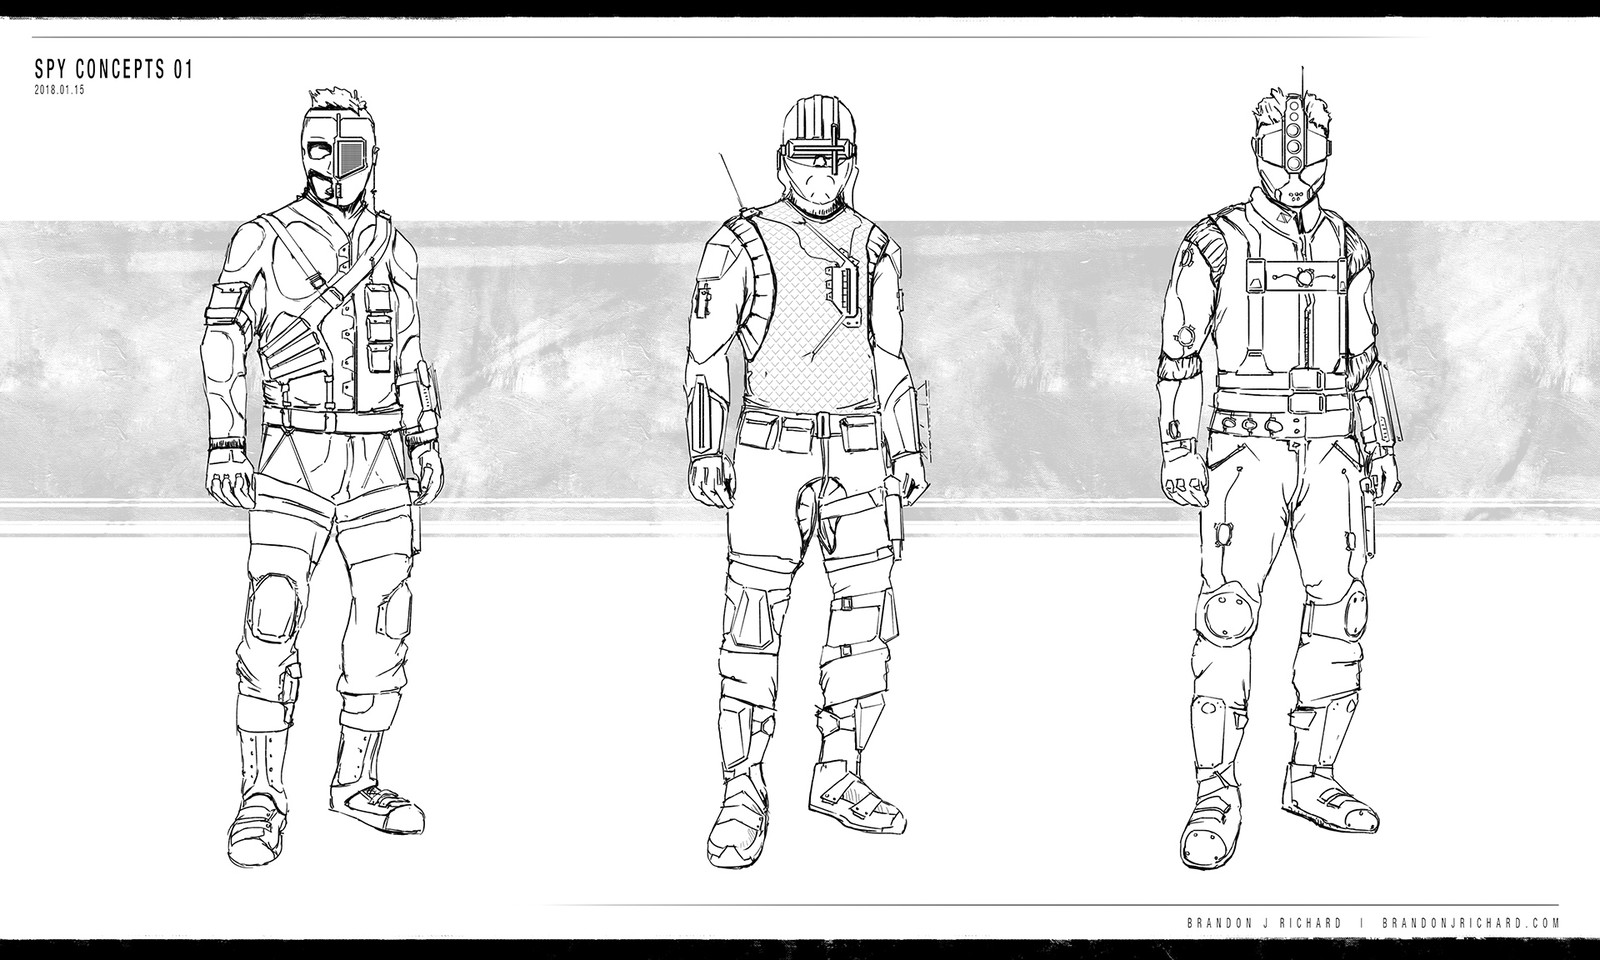 Spy concept sketches to define the look.